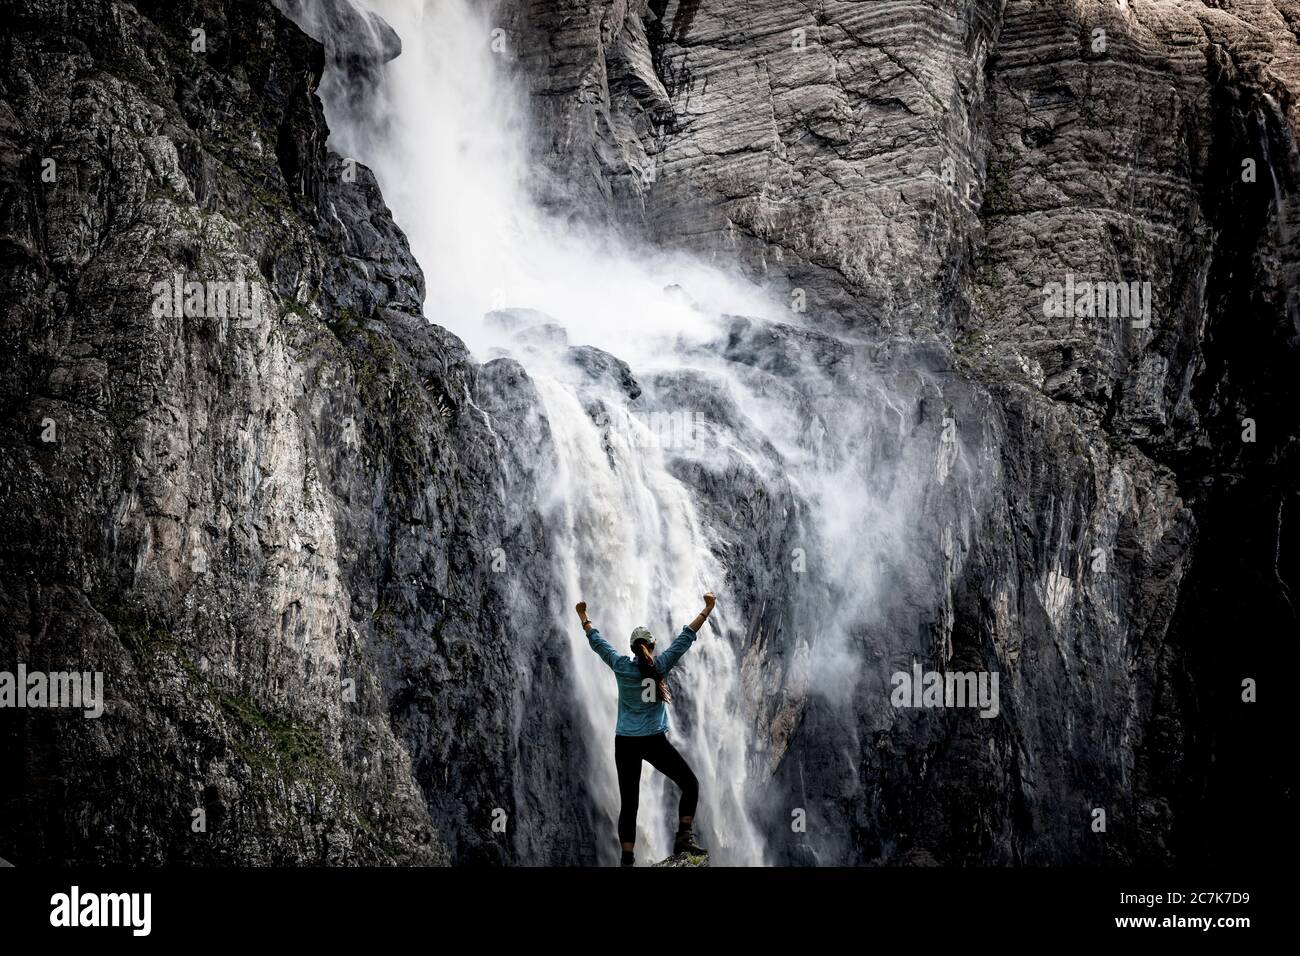 Large waterfall in the Cirque de Gavarnie, Pyrenees National Park, France Stock Photo